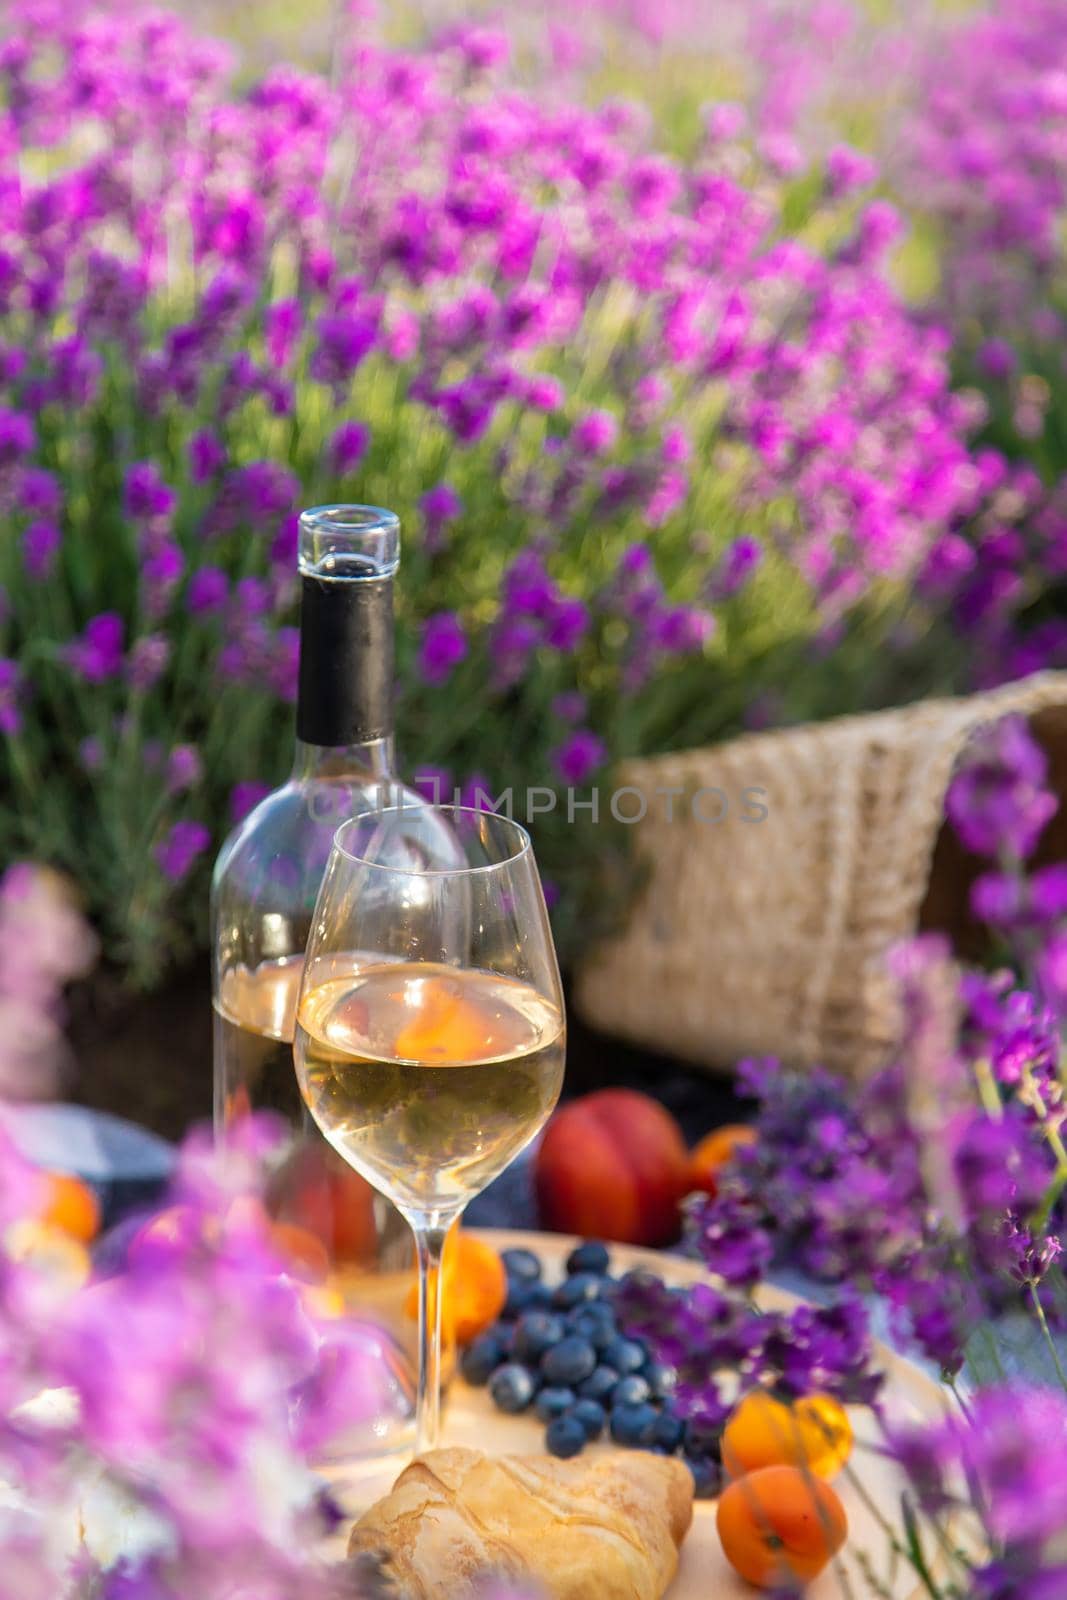 The girl is resting in a lavender field, drinking wine. Selective focus. Relaxation